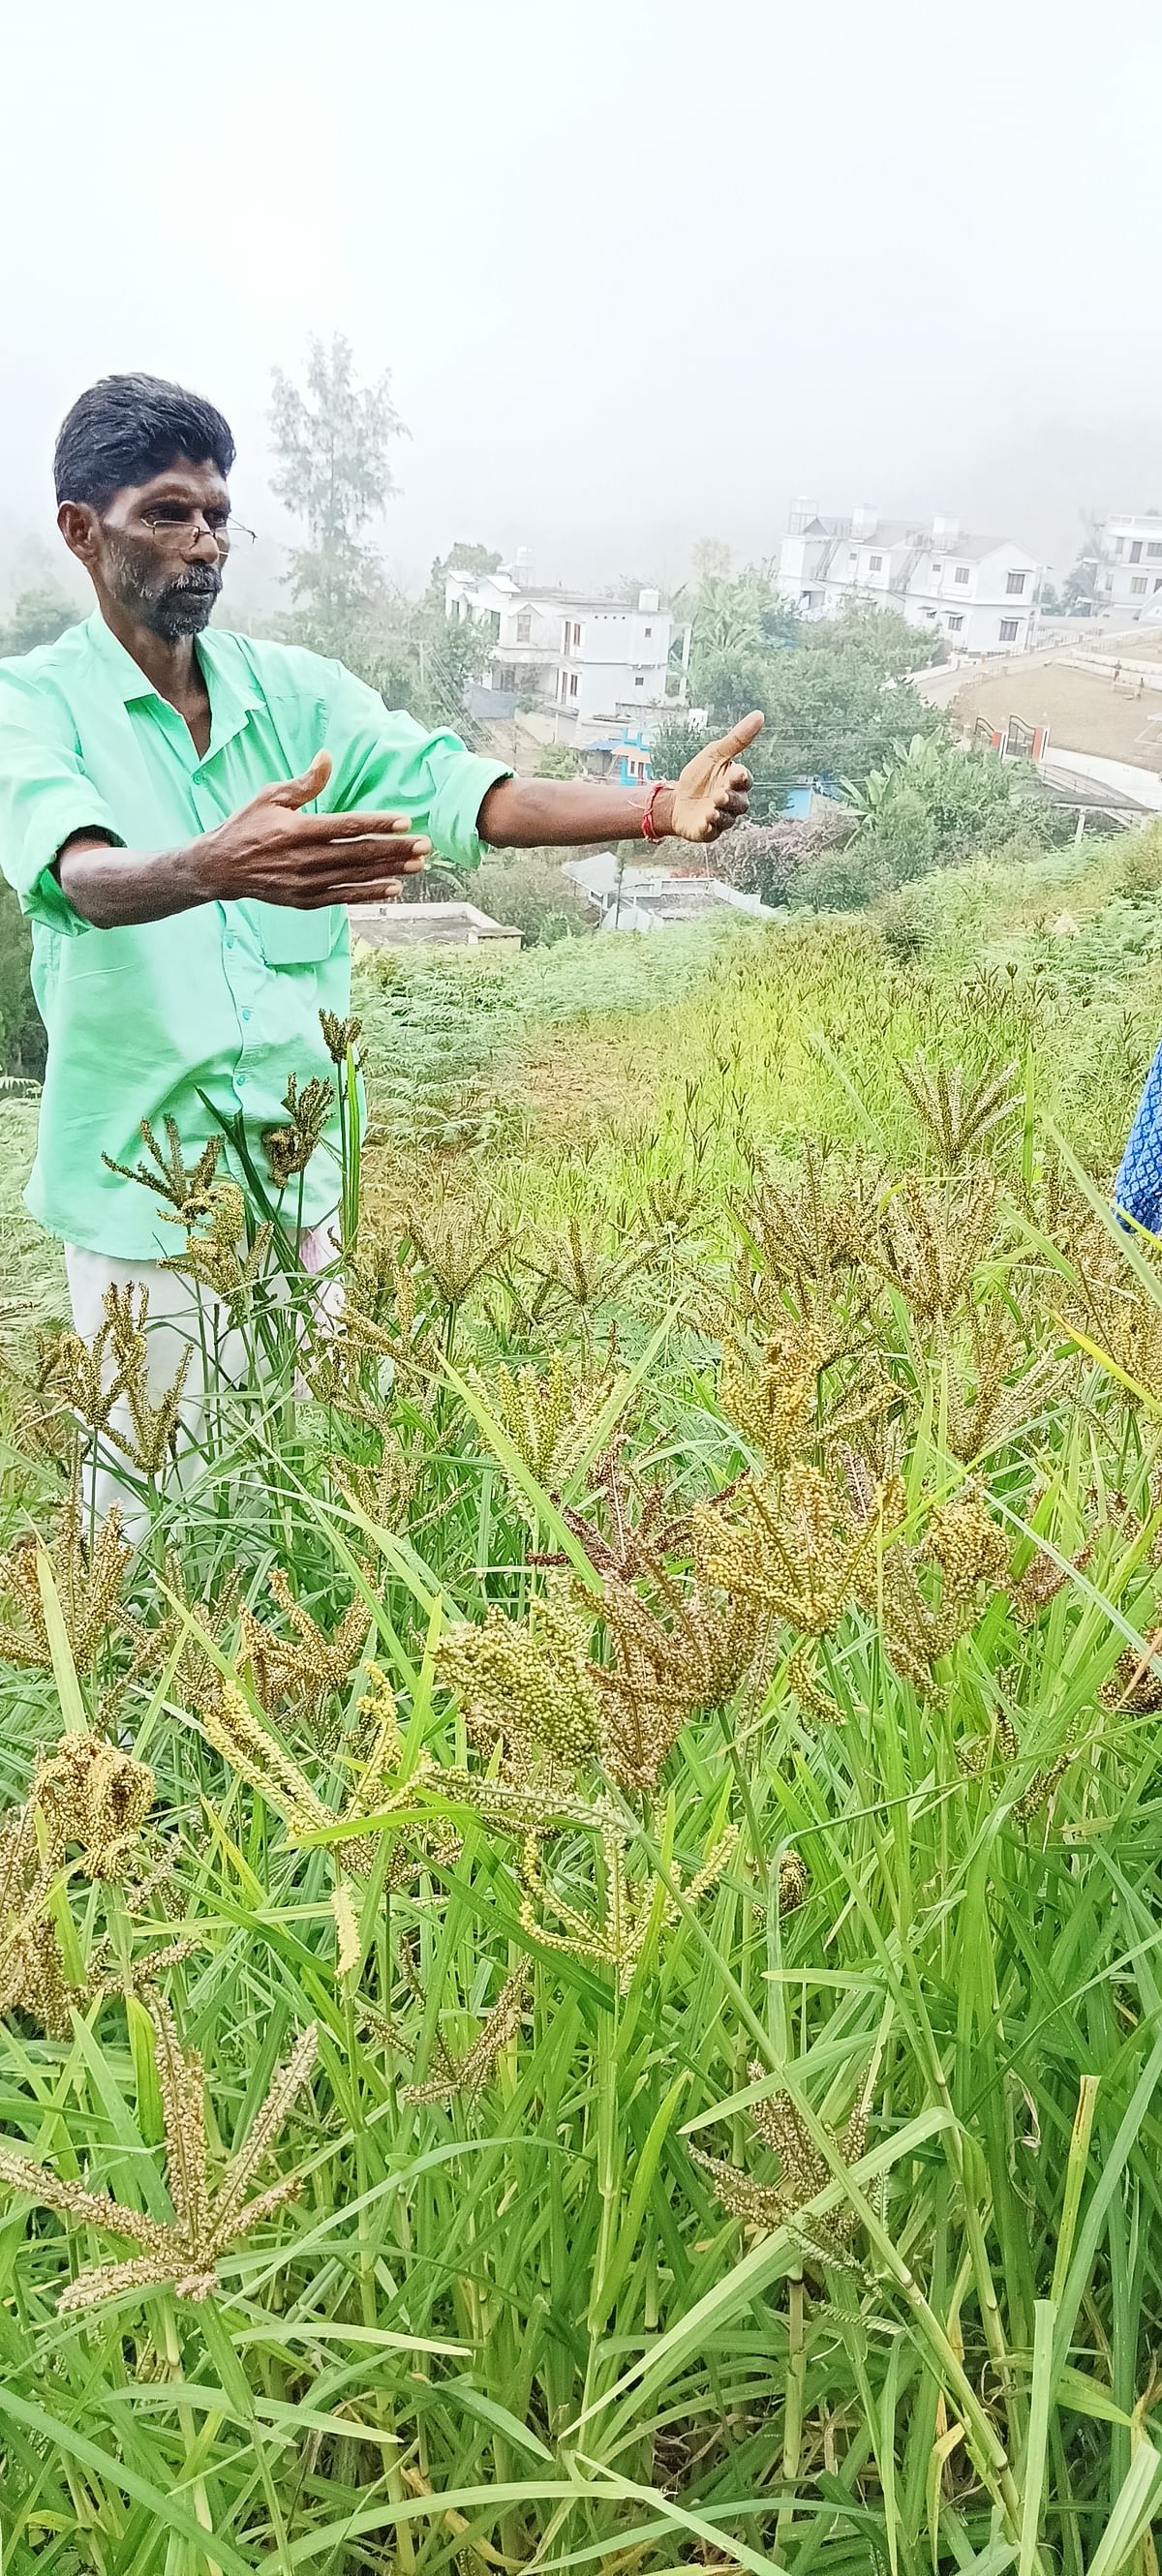 Millet farmer and coordinator R Radhakrishnan showing the yield of ragi cultivated in Kanthalloor.